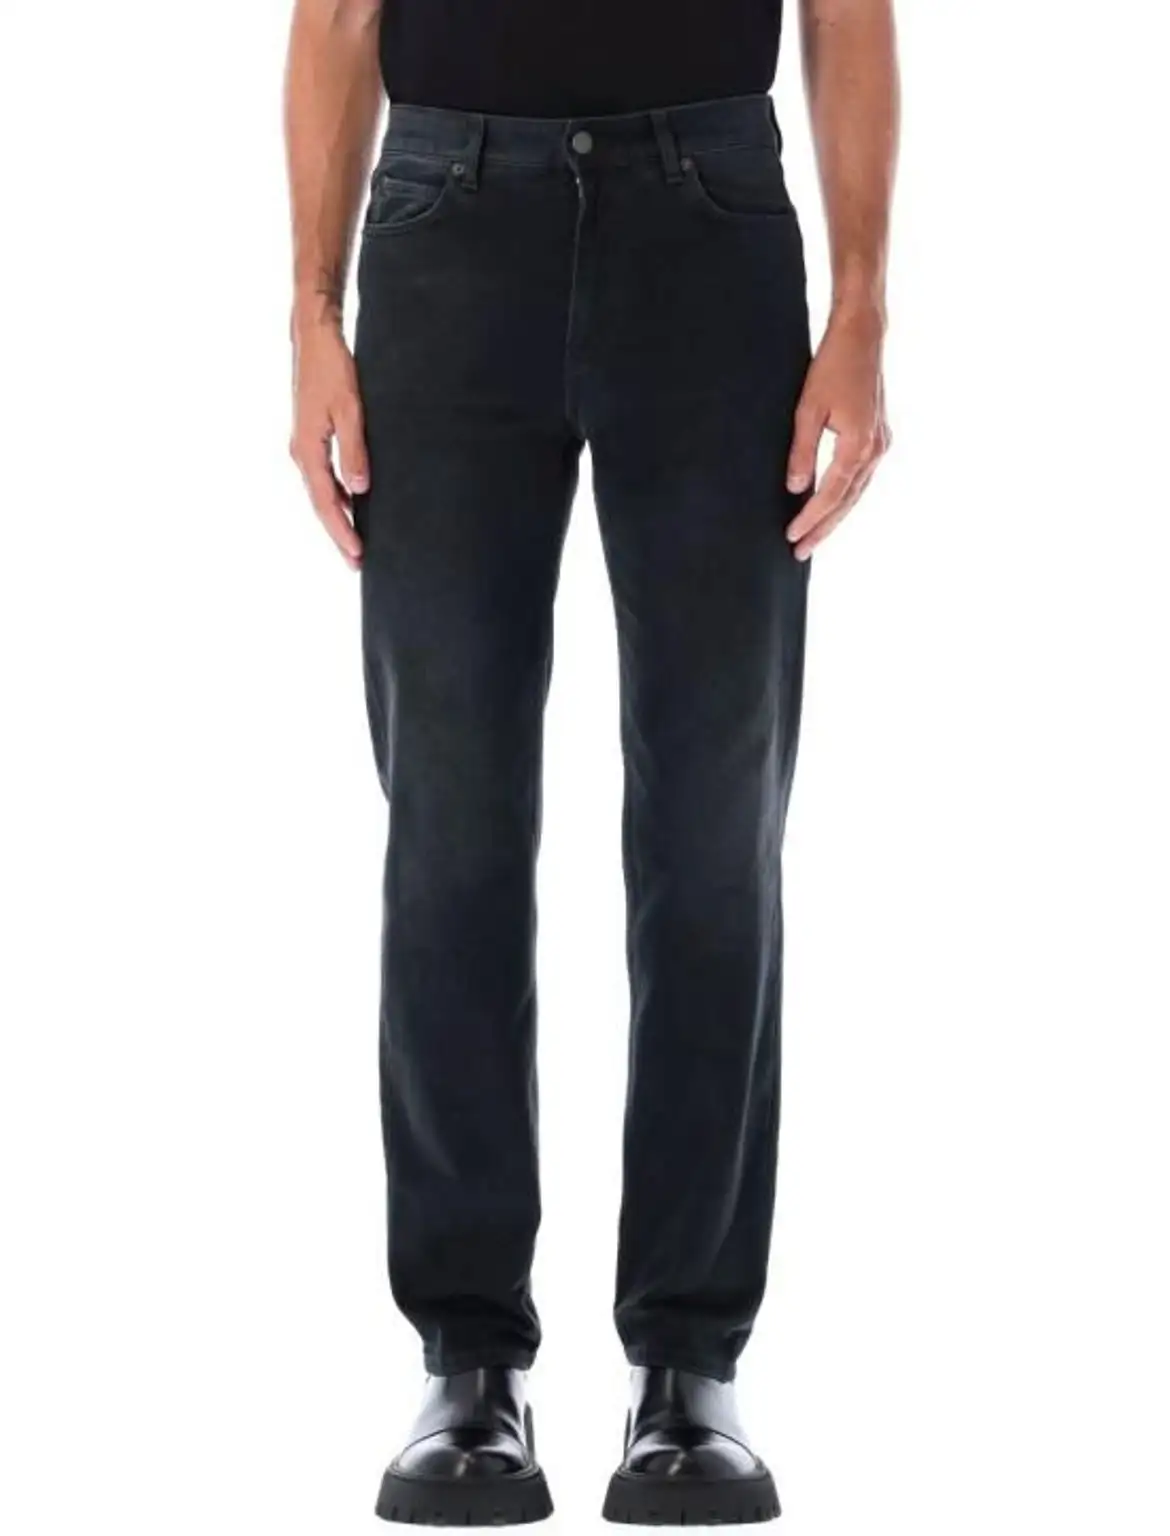 Men's Large Fit Tailored Pants in Black